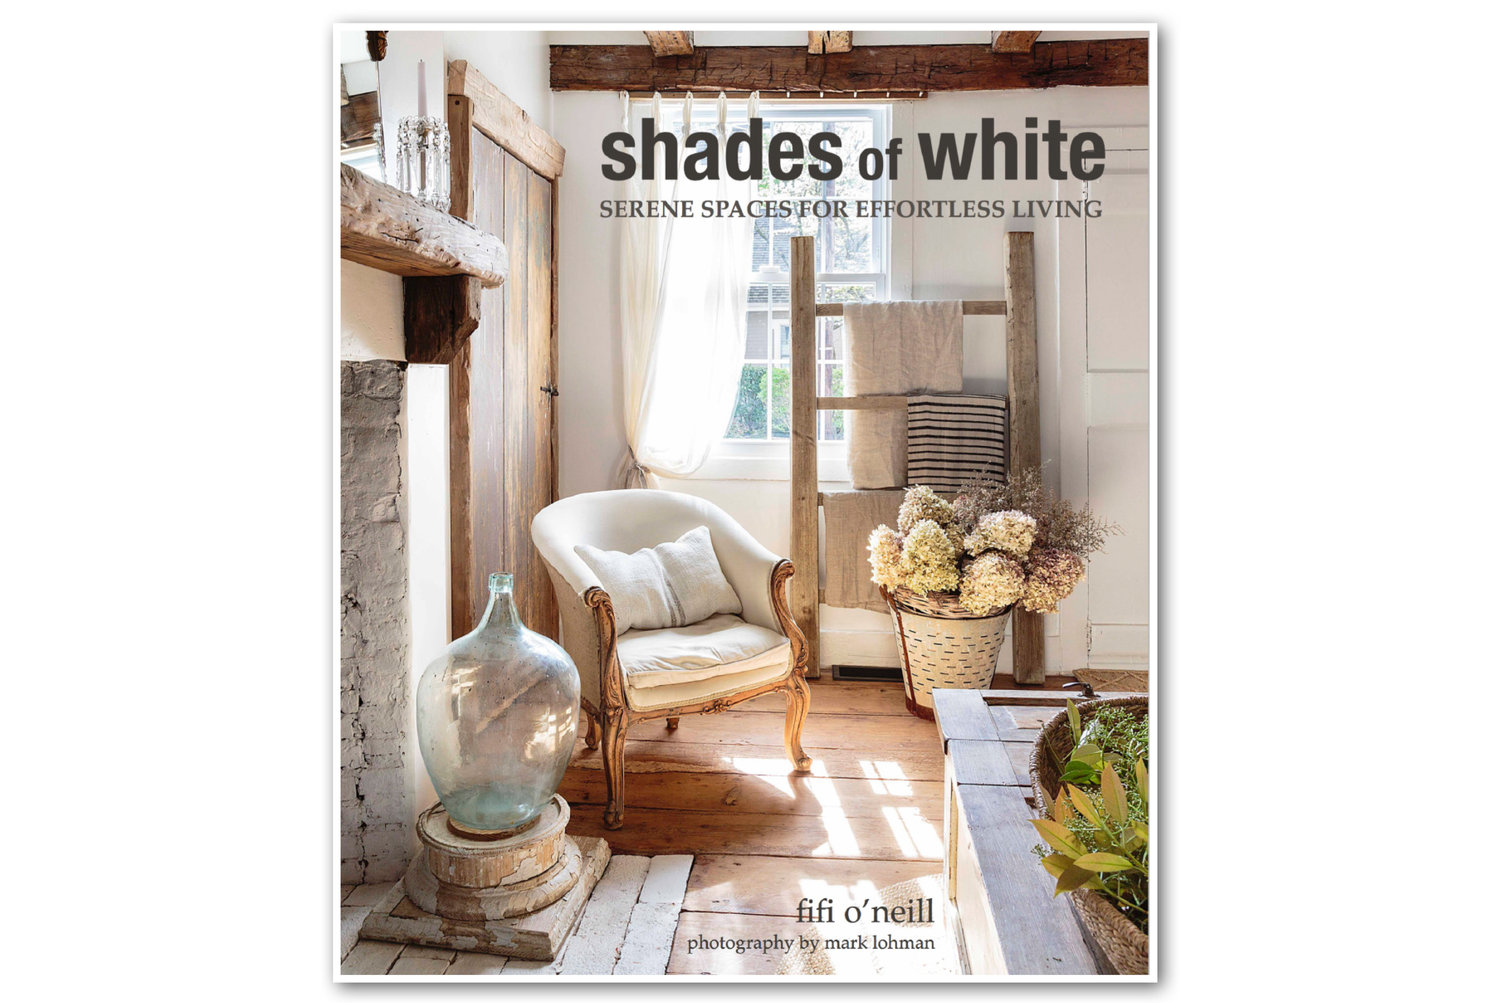 Find more inspiring spaces in Shades of White: Serene Spaces for Effortless Living by Fifi O’Neill, photography by Mark Lohman, CICO Books. 
Available October 12.